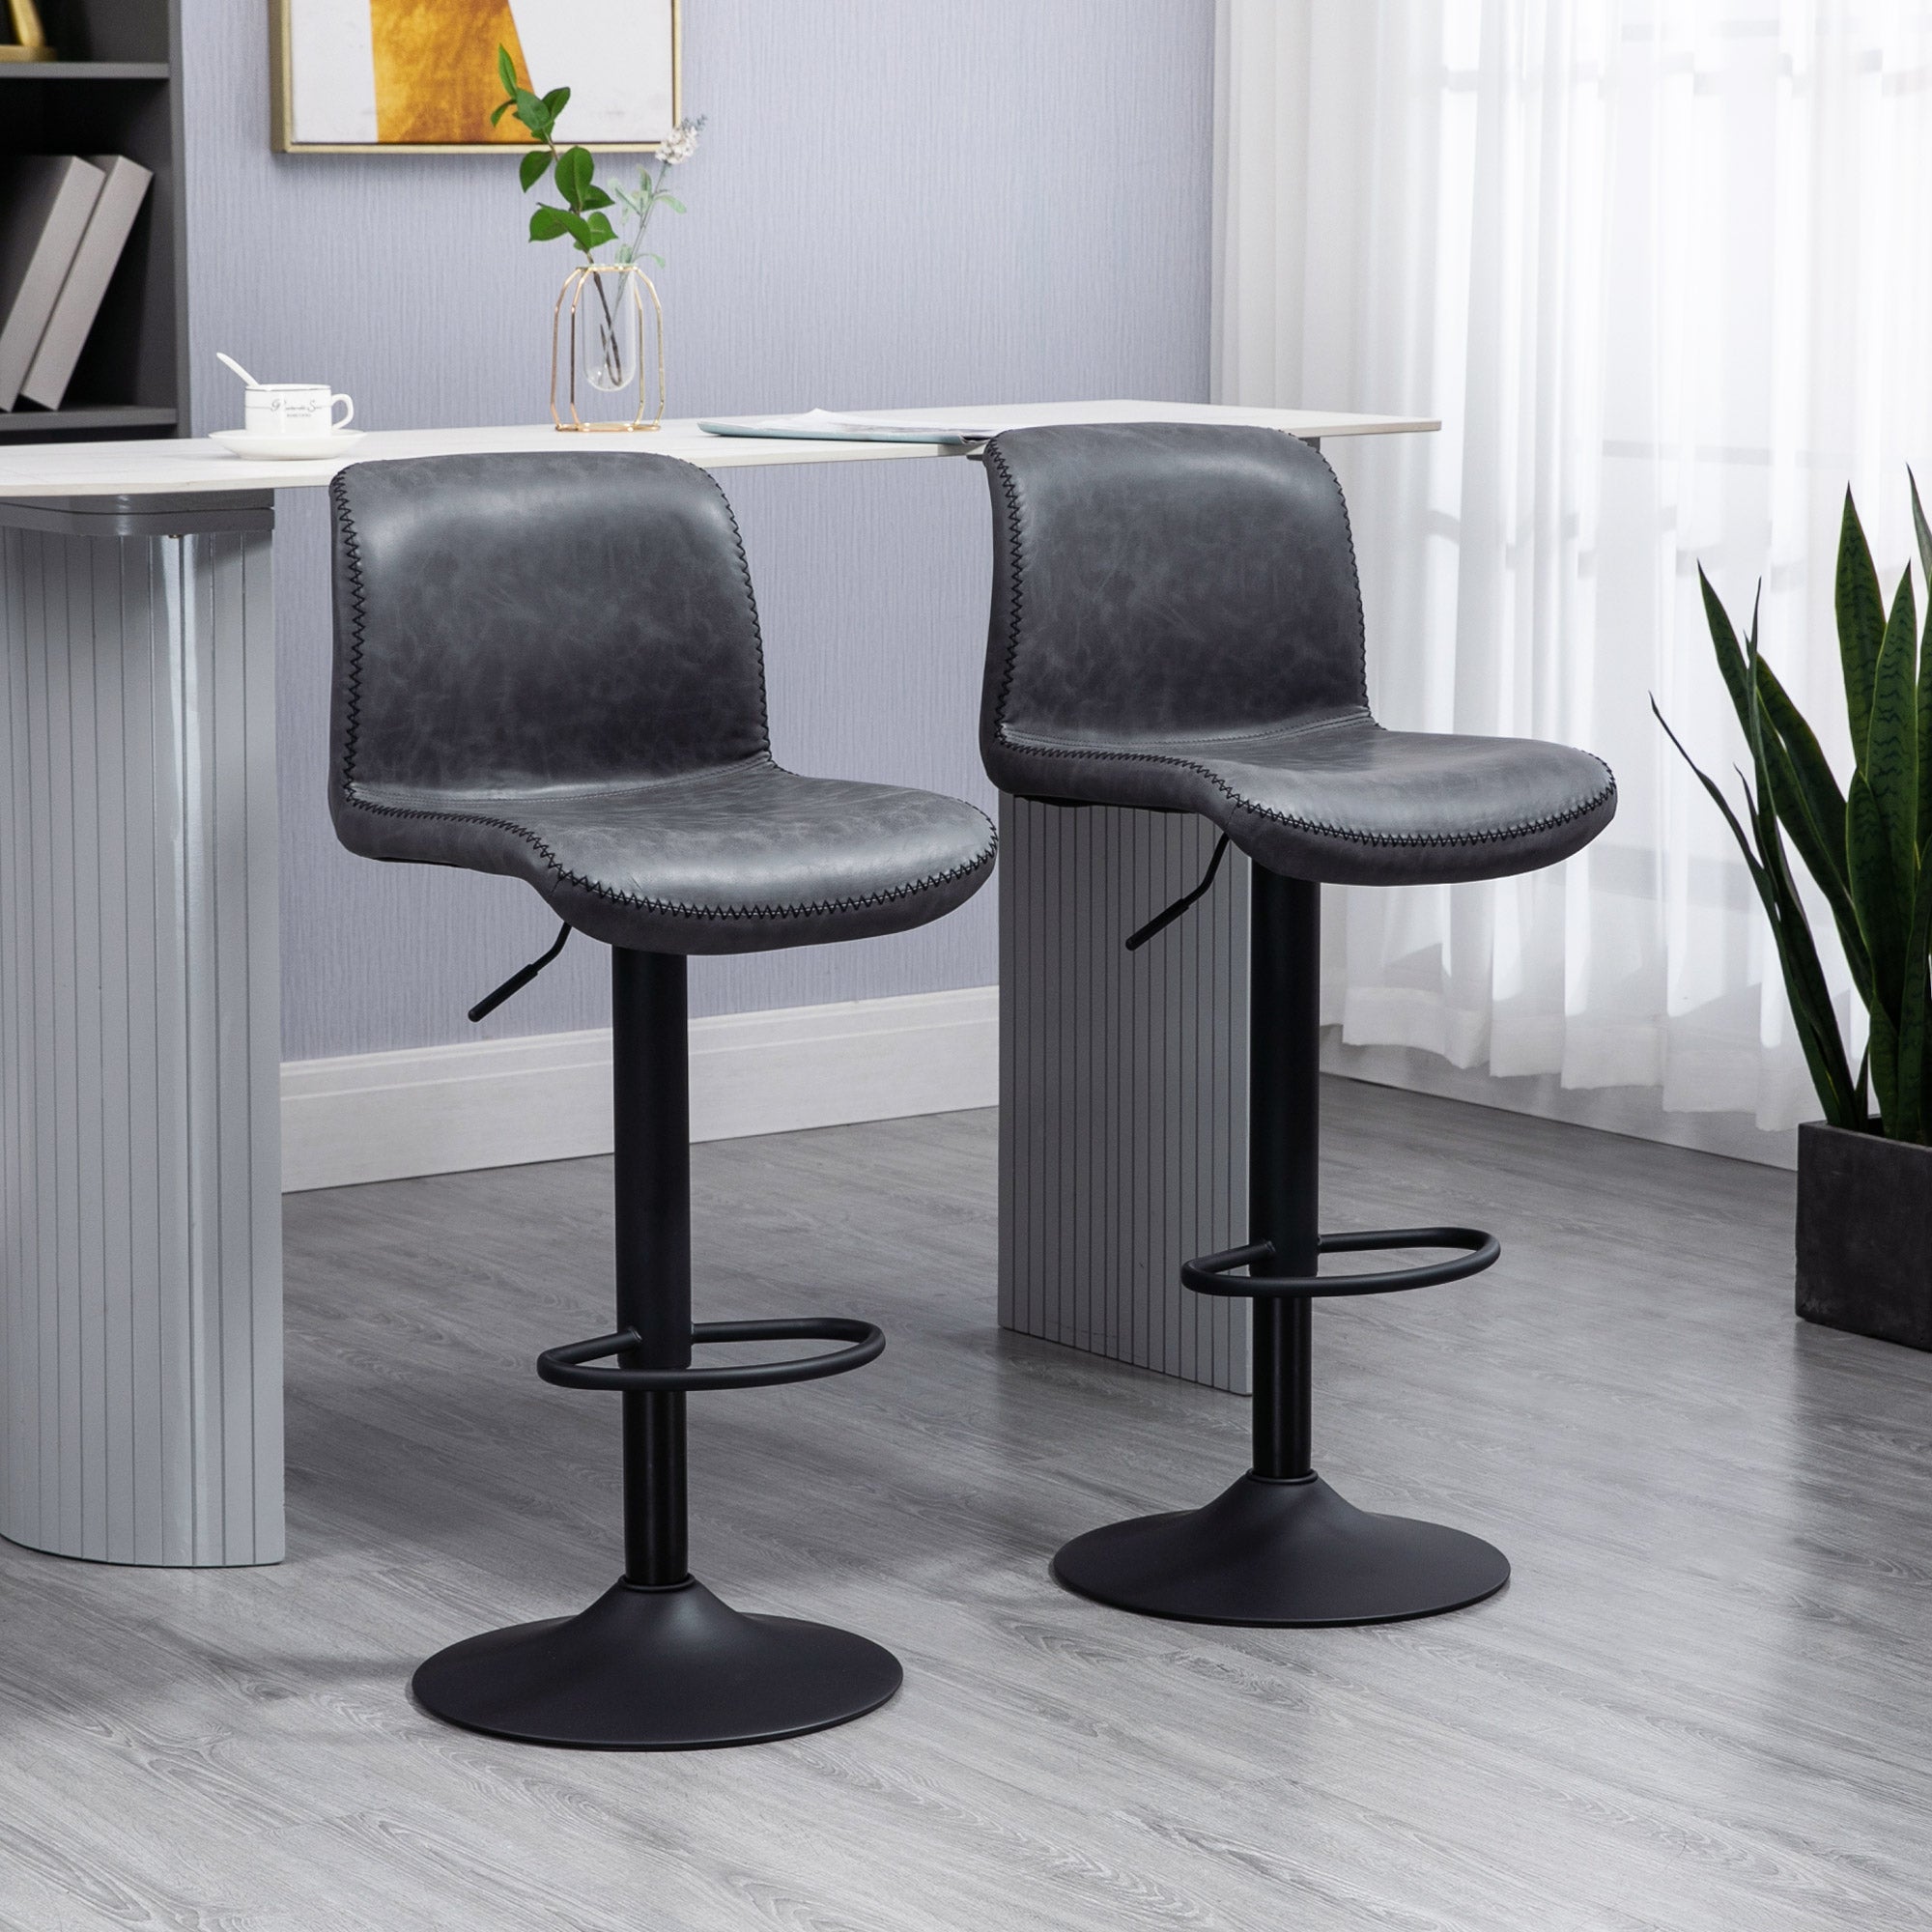 Set of 2 Bar Stool Adjustable Height Swivel Footrest and Base for Breakfast Bar, Kitchen and Home, Dark Grey  AOSOM   